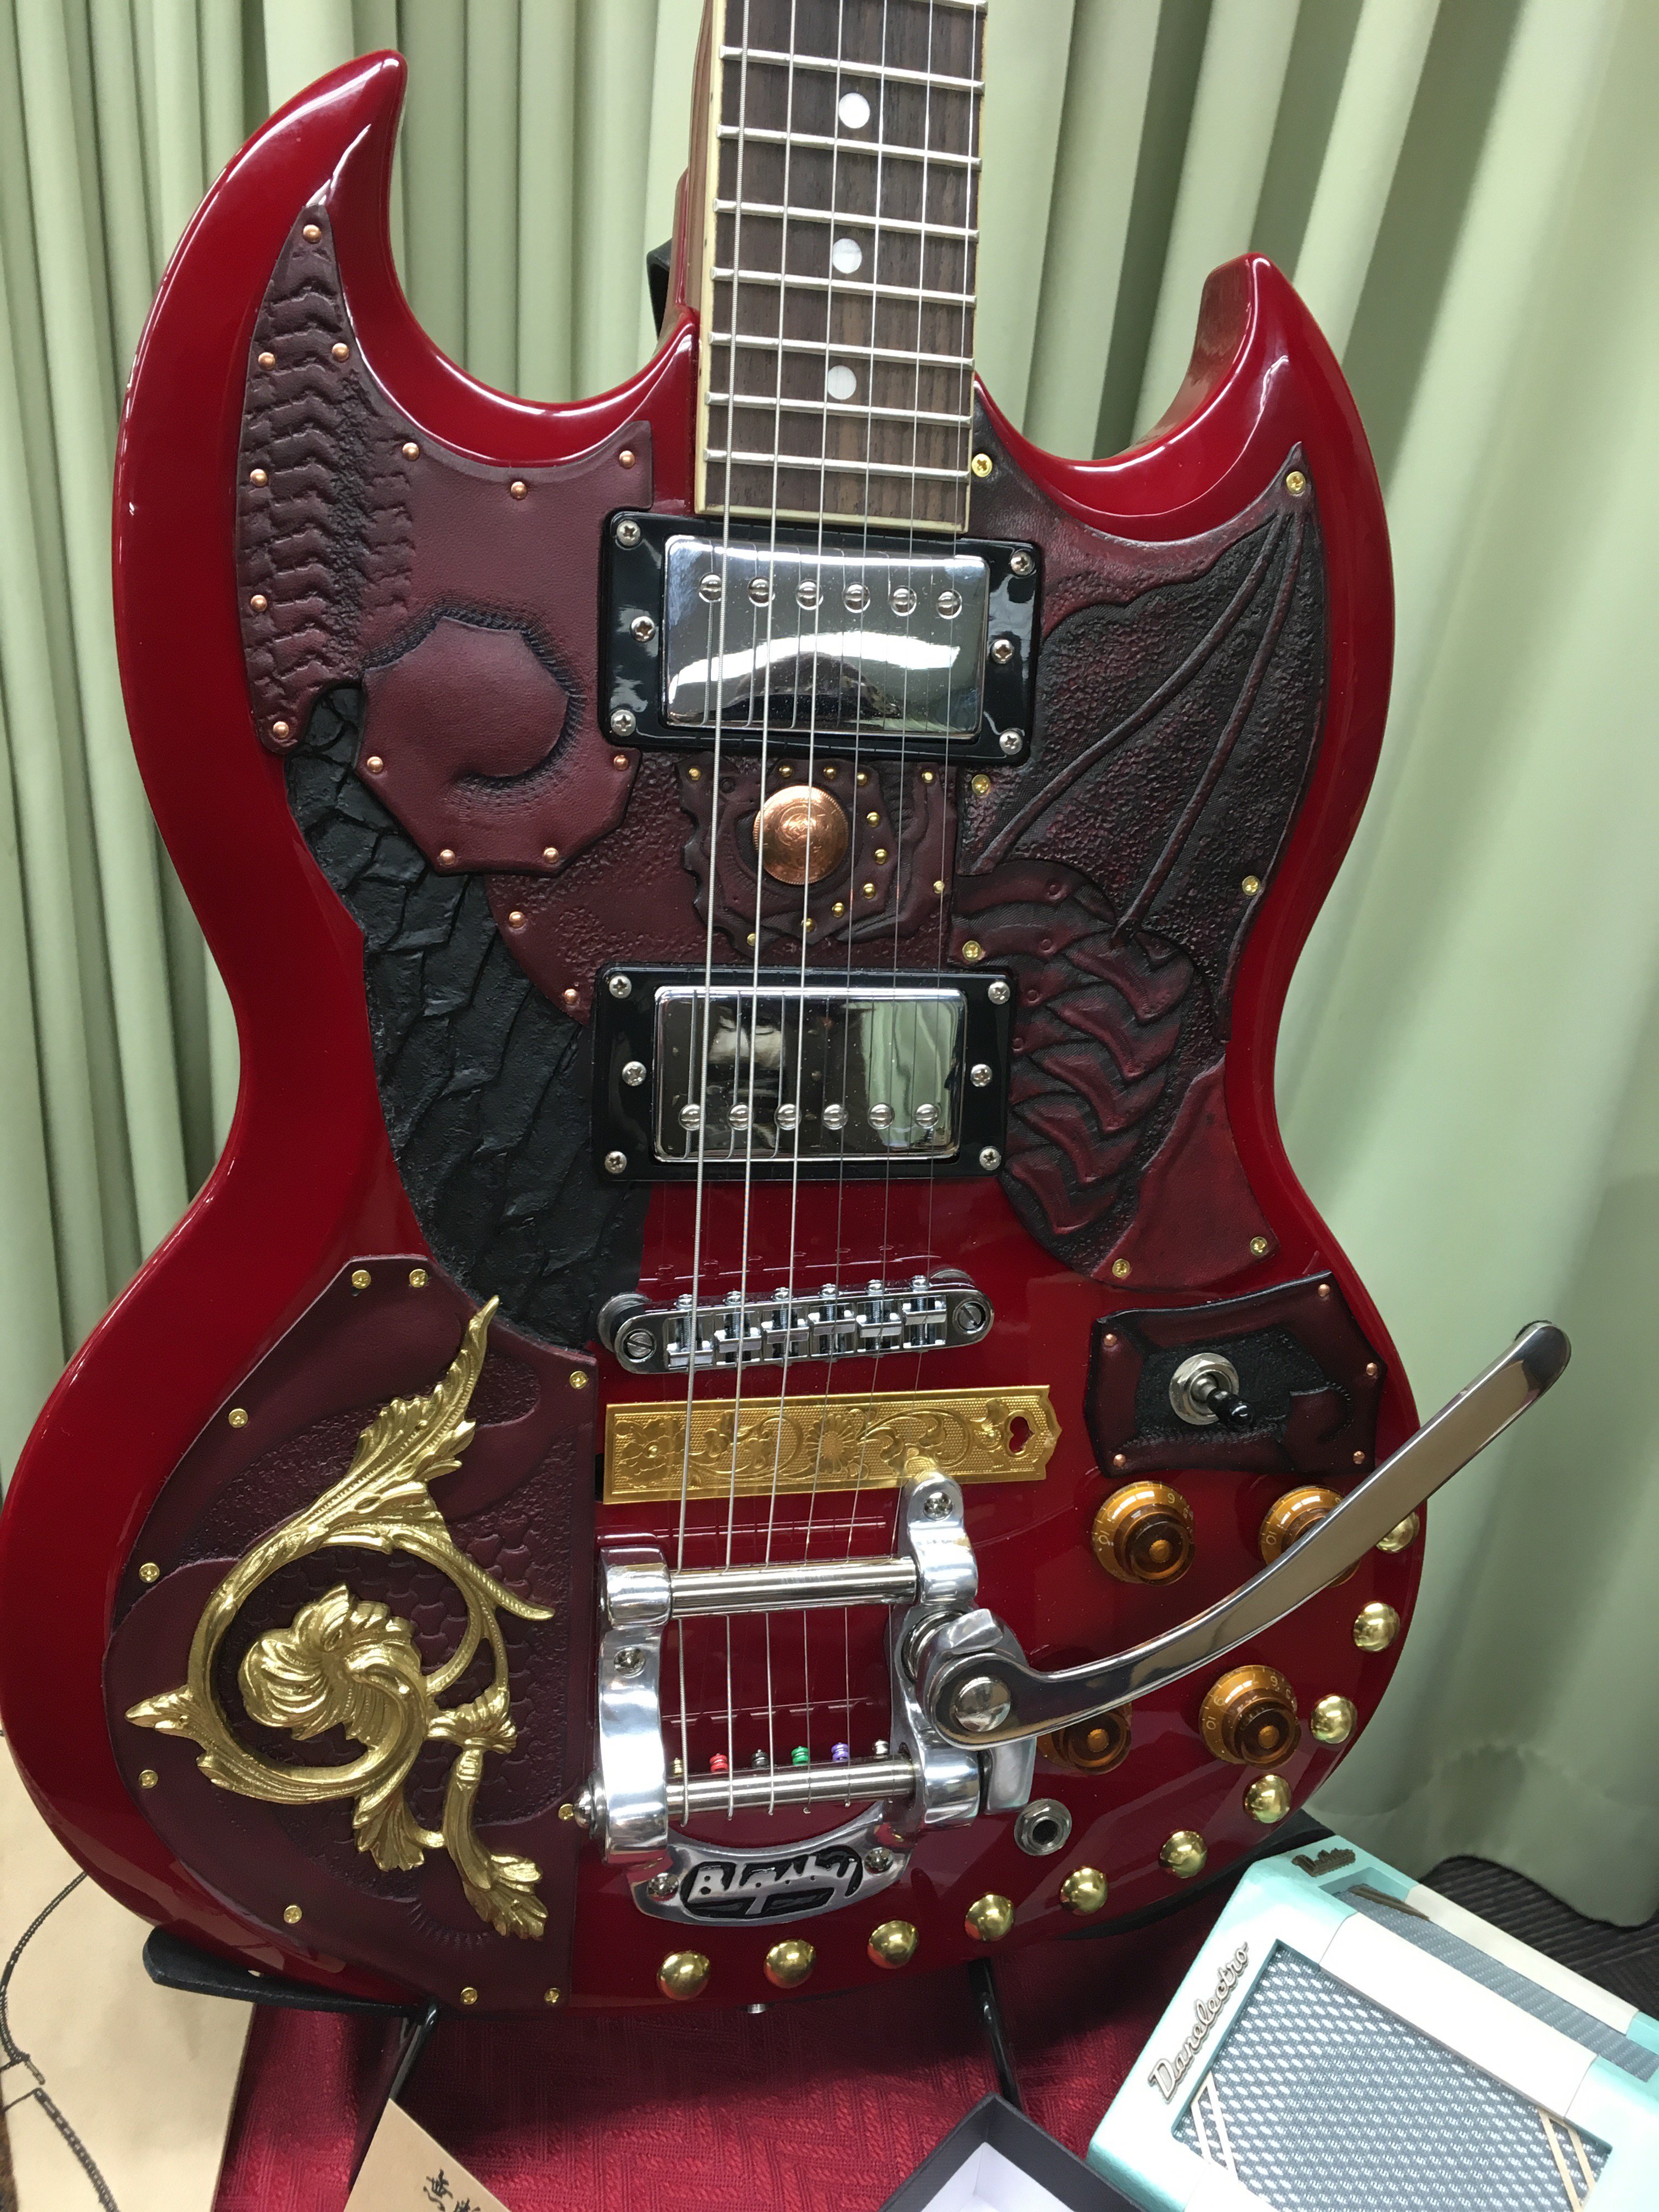 Sensitivecube Well Decorated Guitar Cool Leather Art Rodeojet さんのどえらいかっこいいギター ストラップも素敵 スチームパンクマーケット Steampunk Tokyo Indieart Japan T Co Bzqvgohnpk Twitter